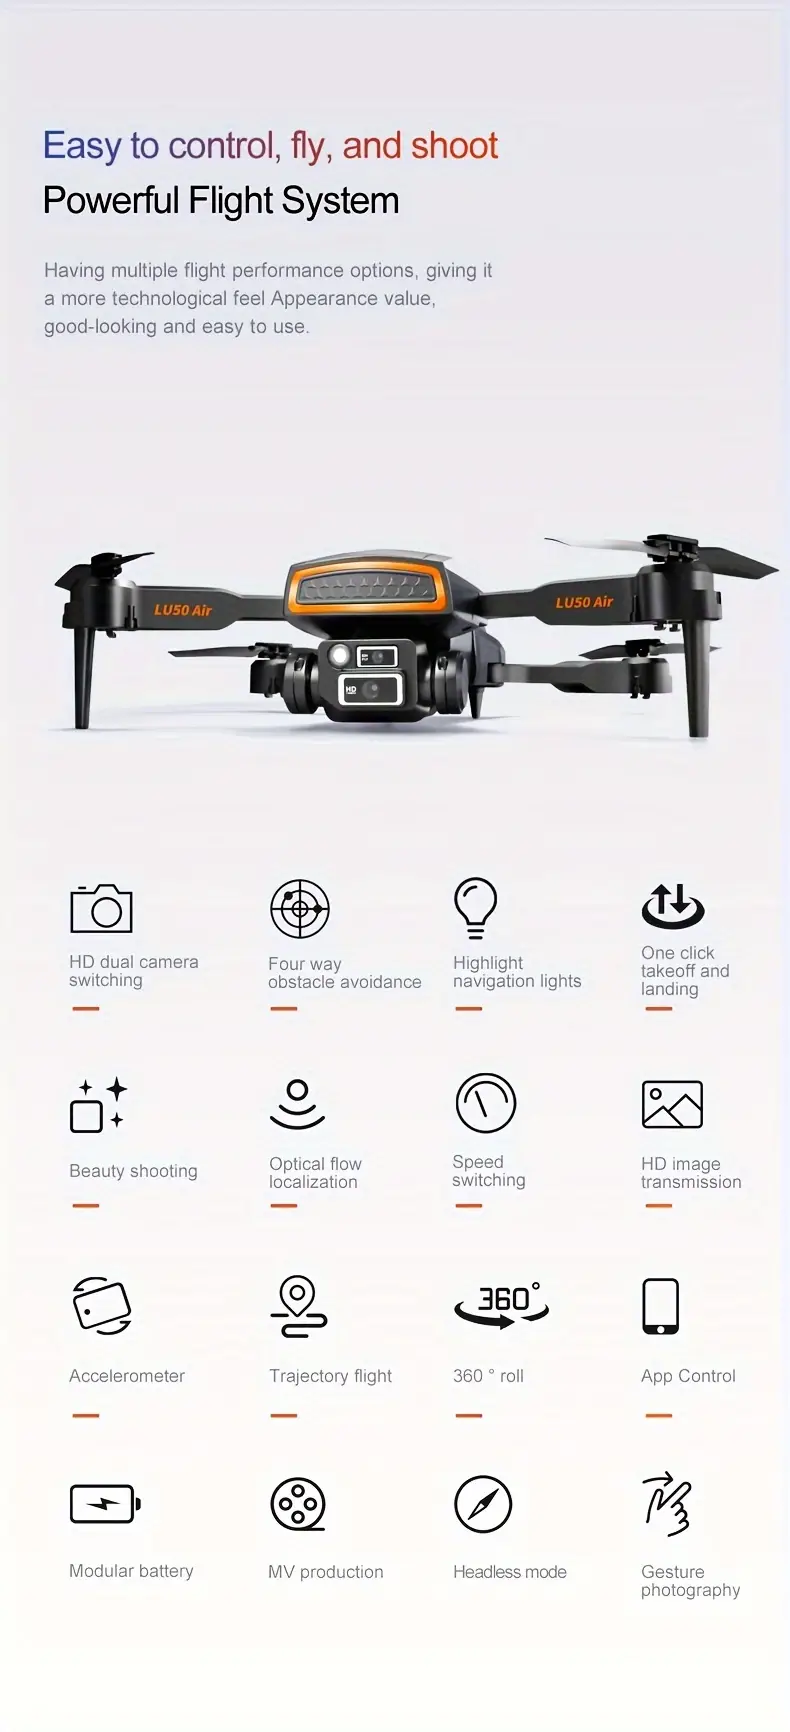 lu50 drone equipped with esc high definition hd electronic governor dual camera four sided obstacle avoidance cool lighting one key takeoff landing 360 rolling stunt details 4